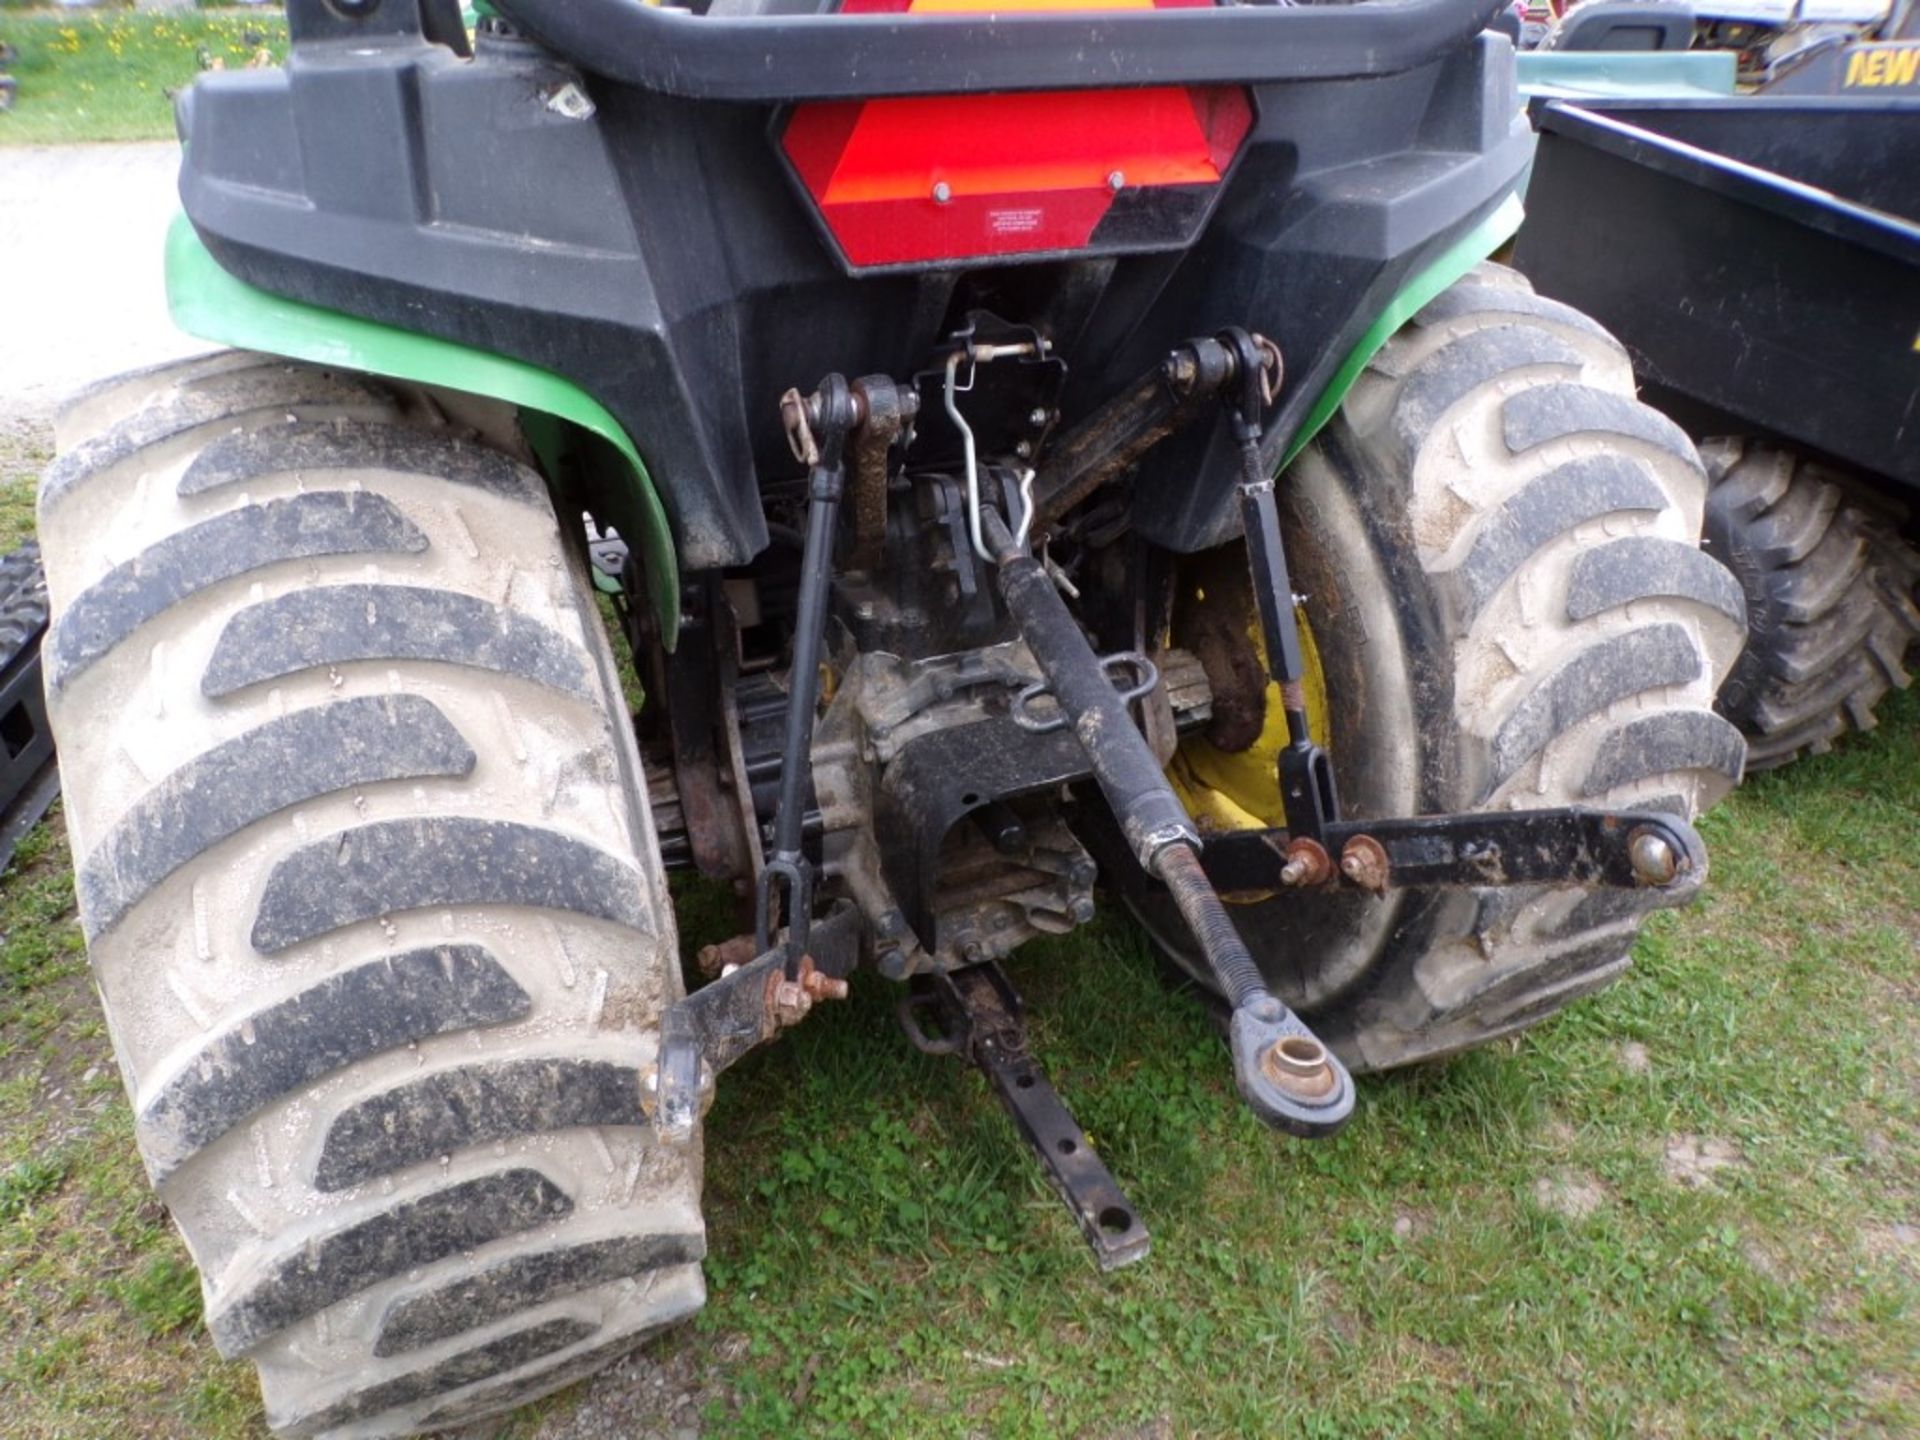 John Deere 3025E, 4 WD Compact, Dsl. Hydro, 3 PT PTO, 4730 Hours, ROPS (5414) - Image 3 of 4